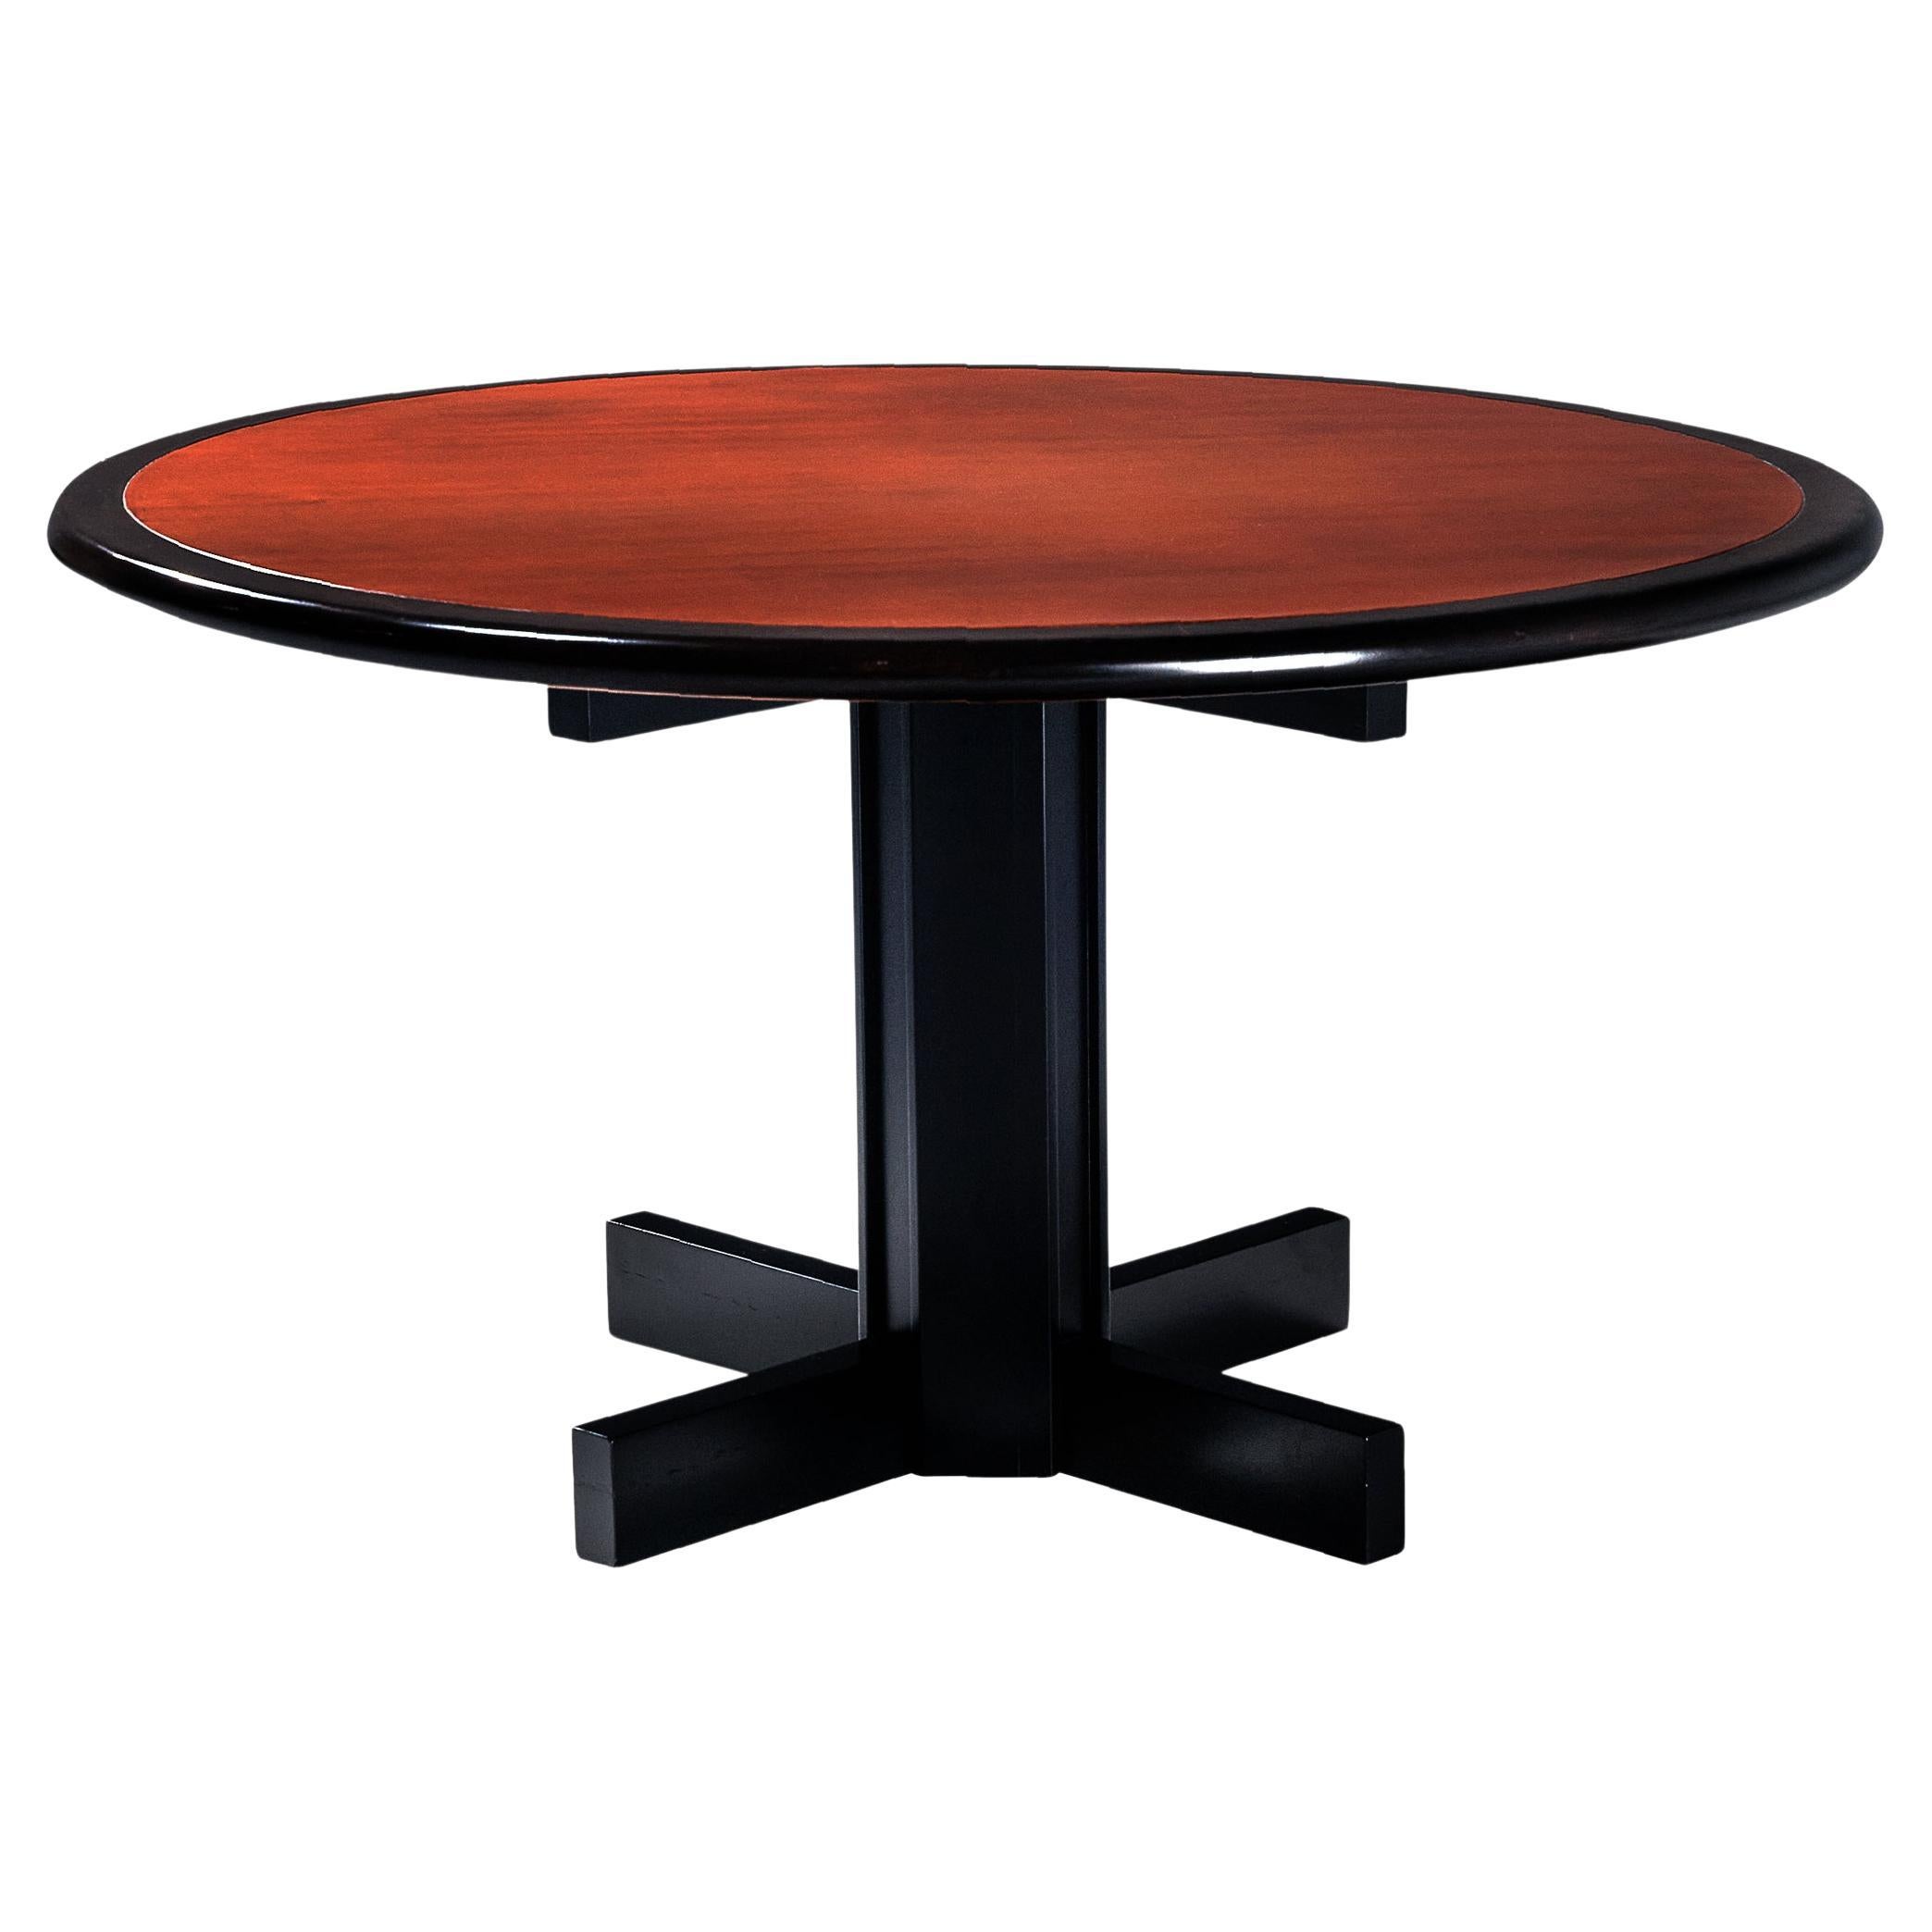 Miguel Milá for Gres Dining or Center Table